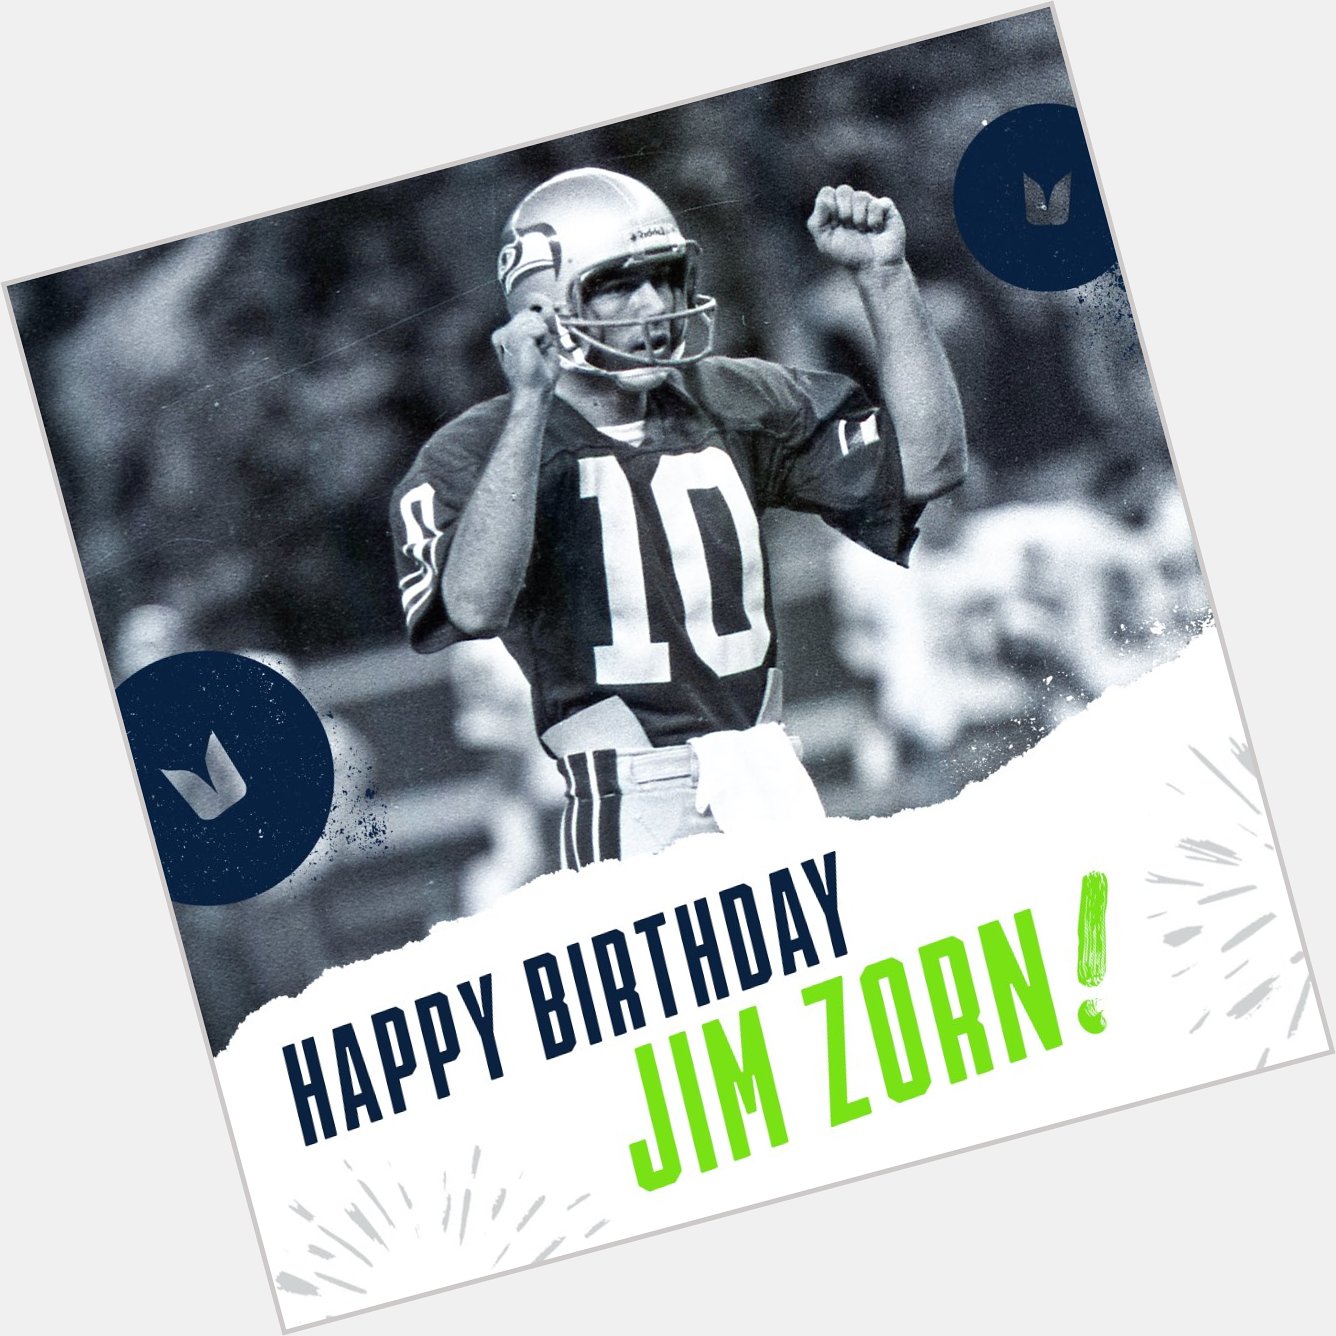 One of the greatest to wish Seahawks Ring of Honor member Jim Zorn a Happy Birthday! 